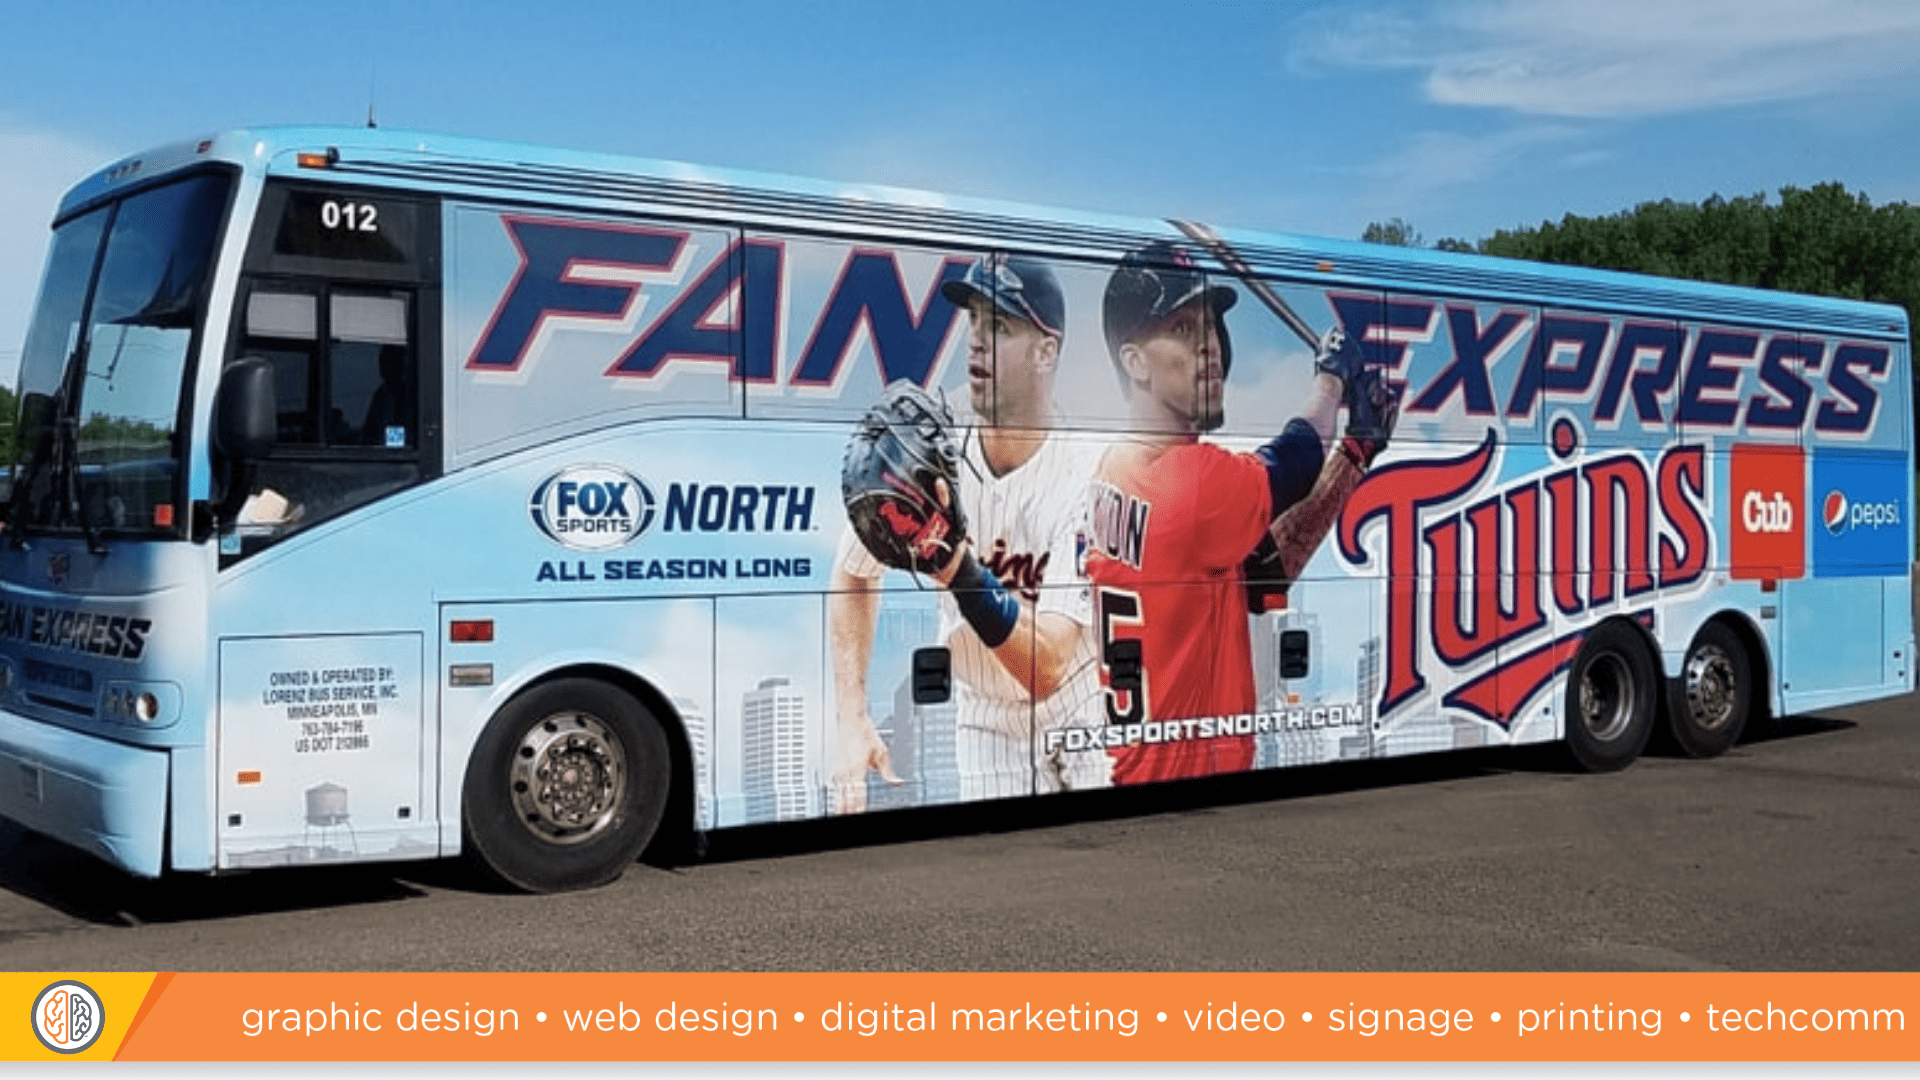 TWINS BUS - SCORE ONE FOR THE HOME TEAM